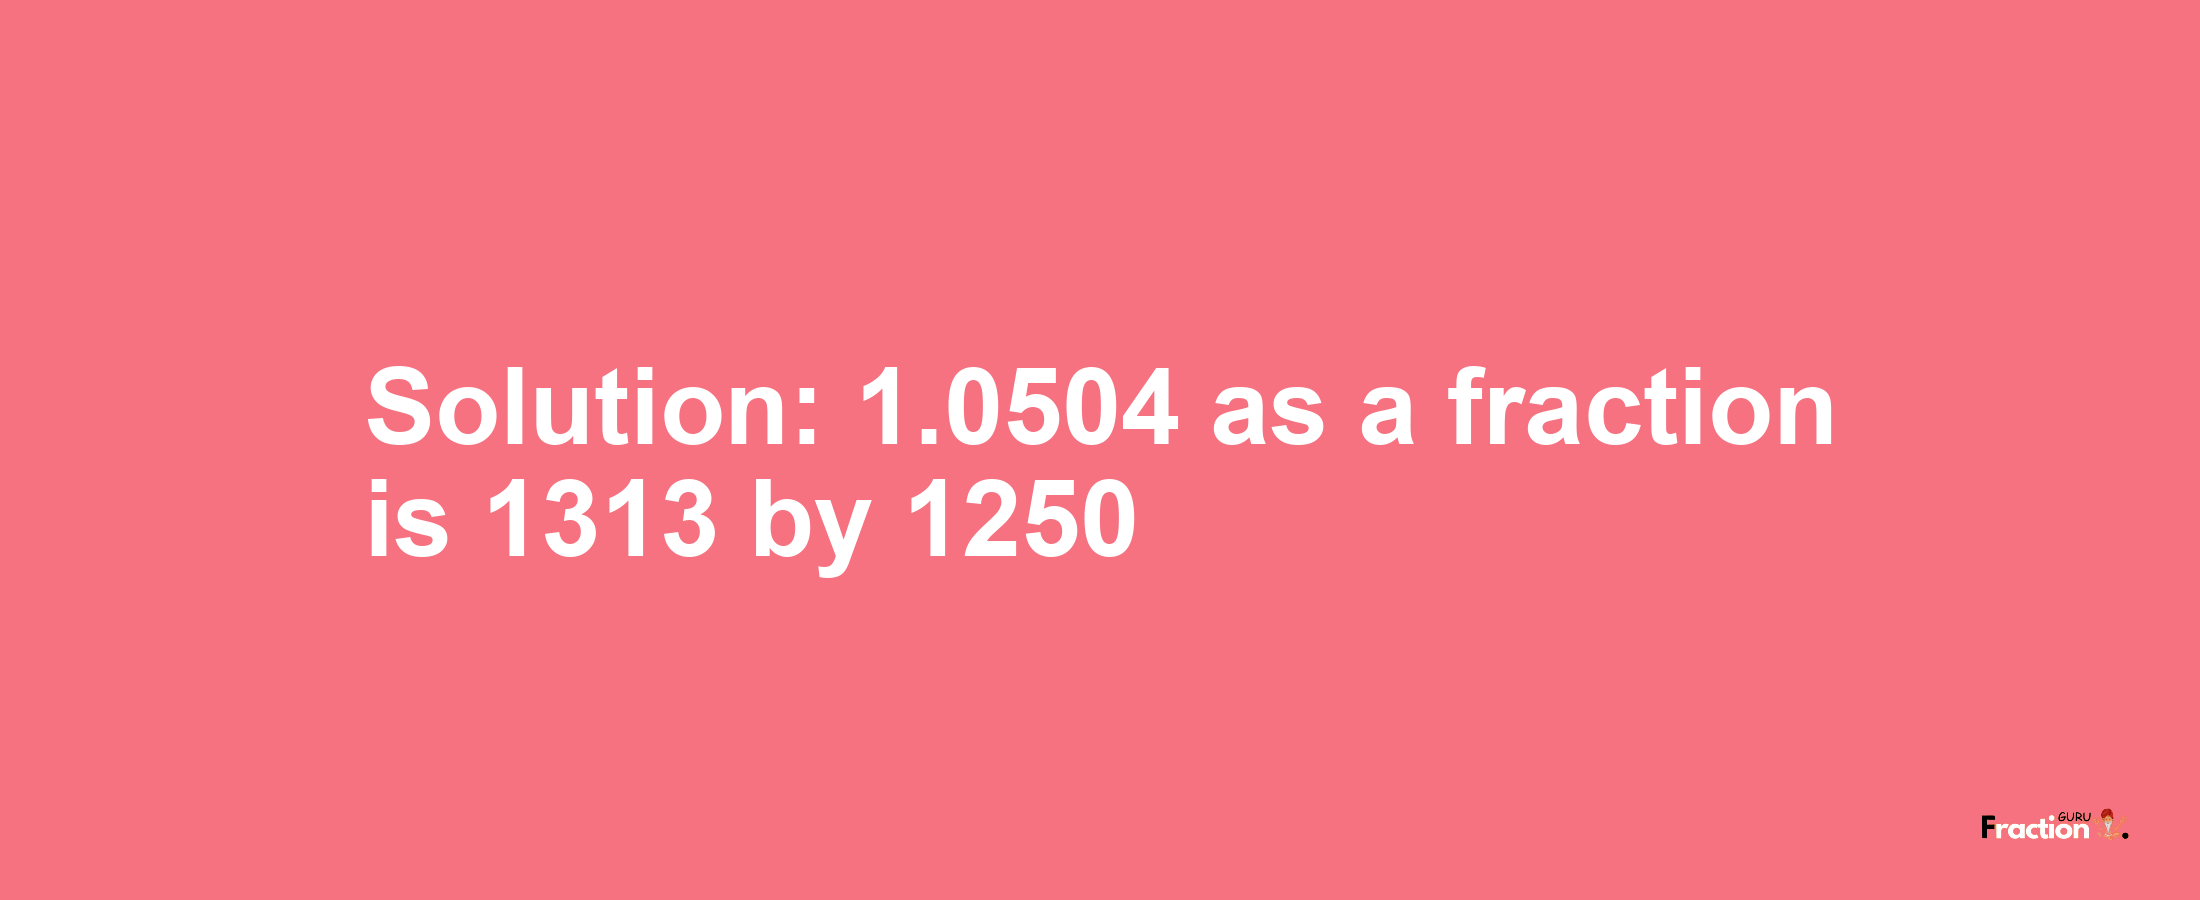 Solution:1.0504 as a fraction is 1313/1250